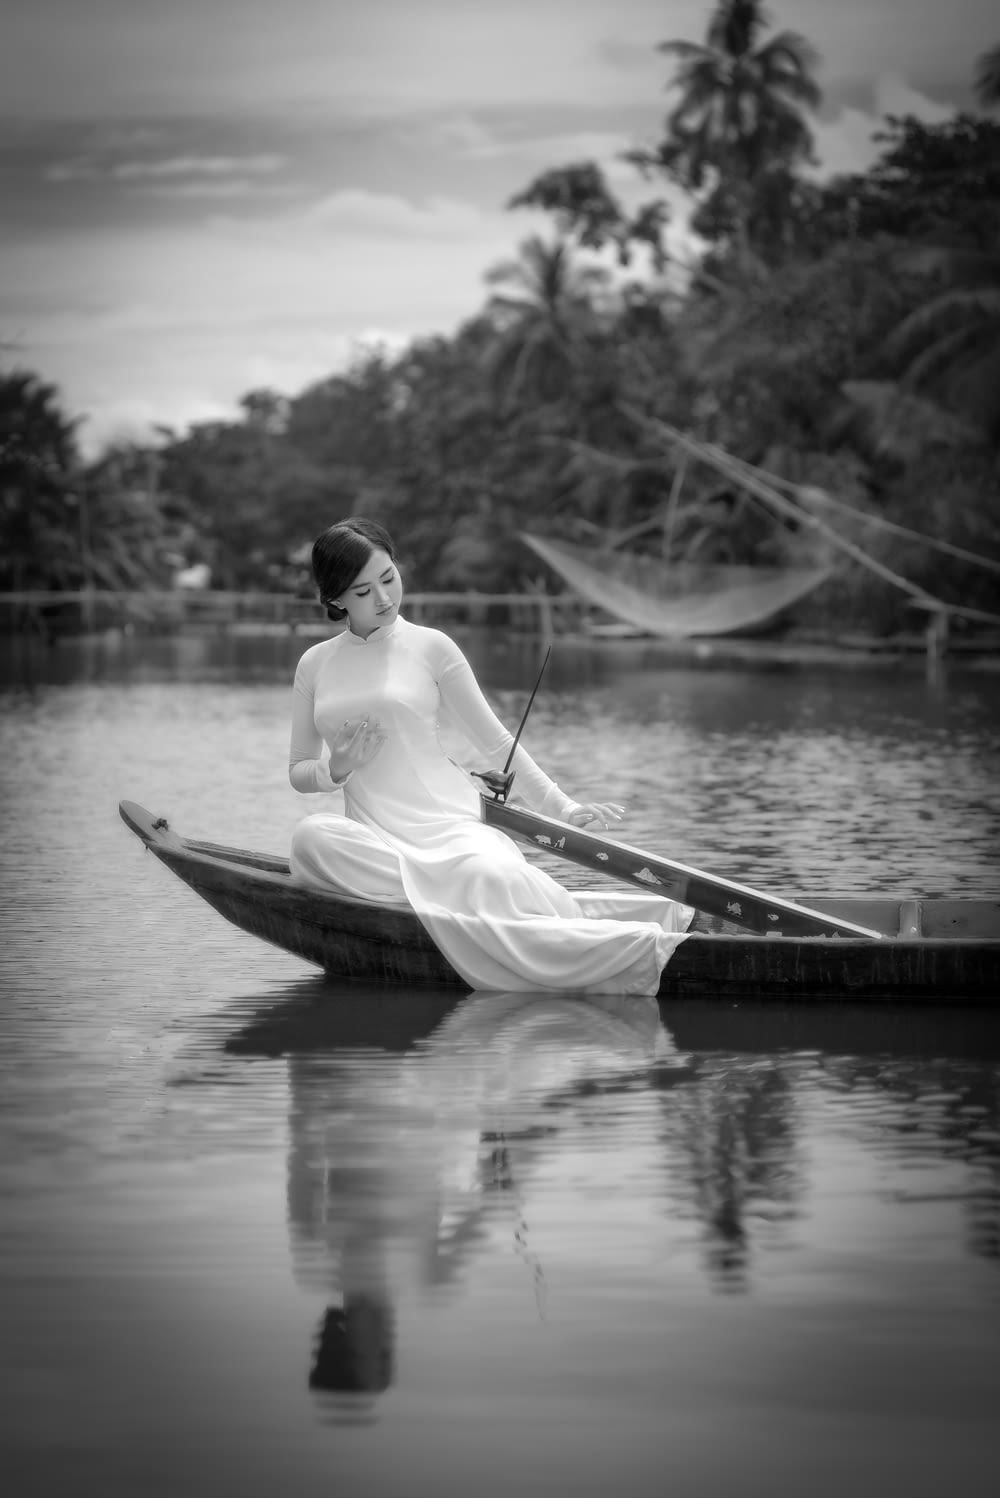 grayscale photo of woman in white shirt riding on boat